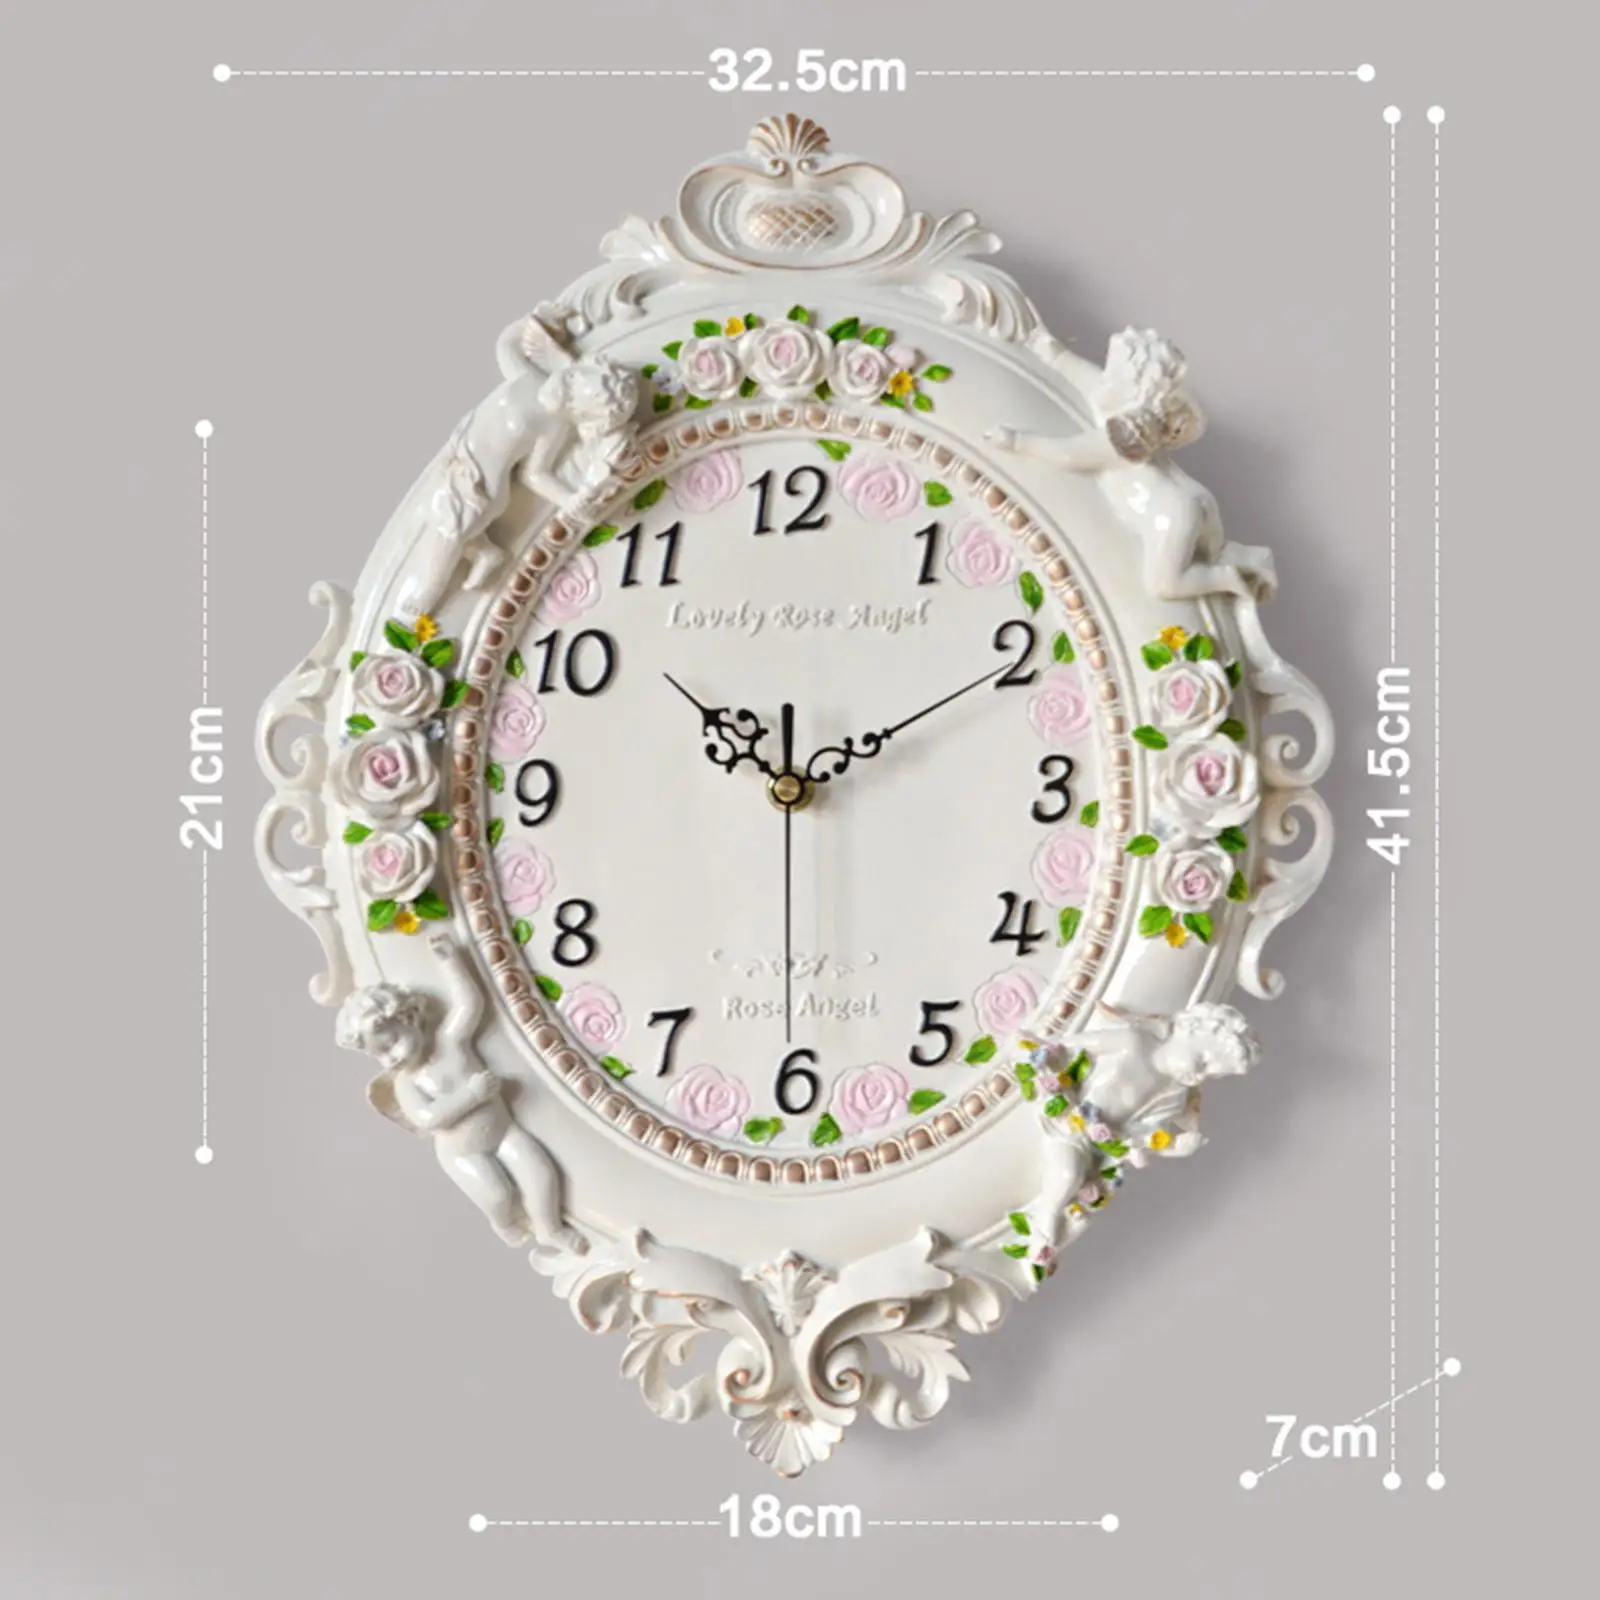 Resin Angel Wall Clock Battery Operated Wall Mount Modern Decorative Silent